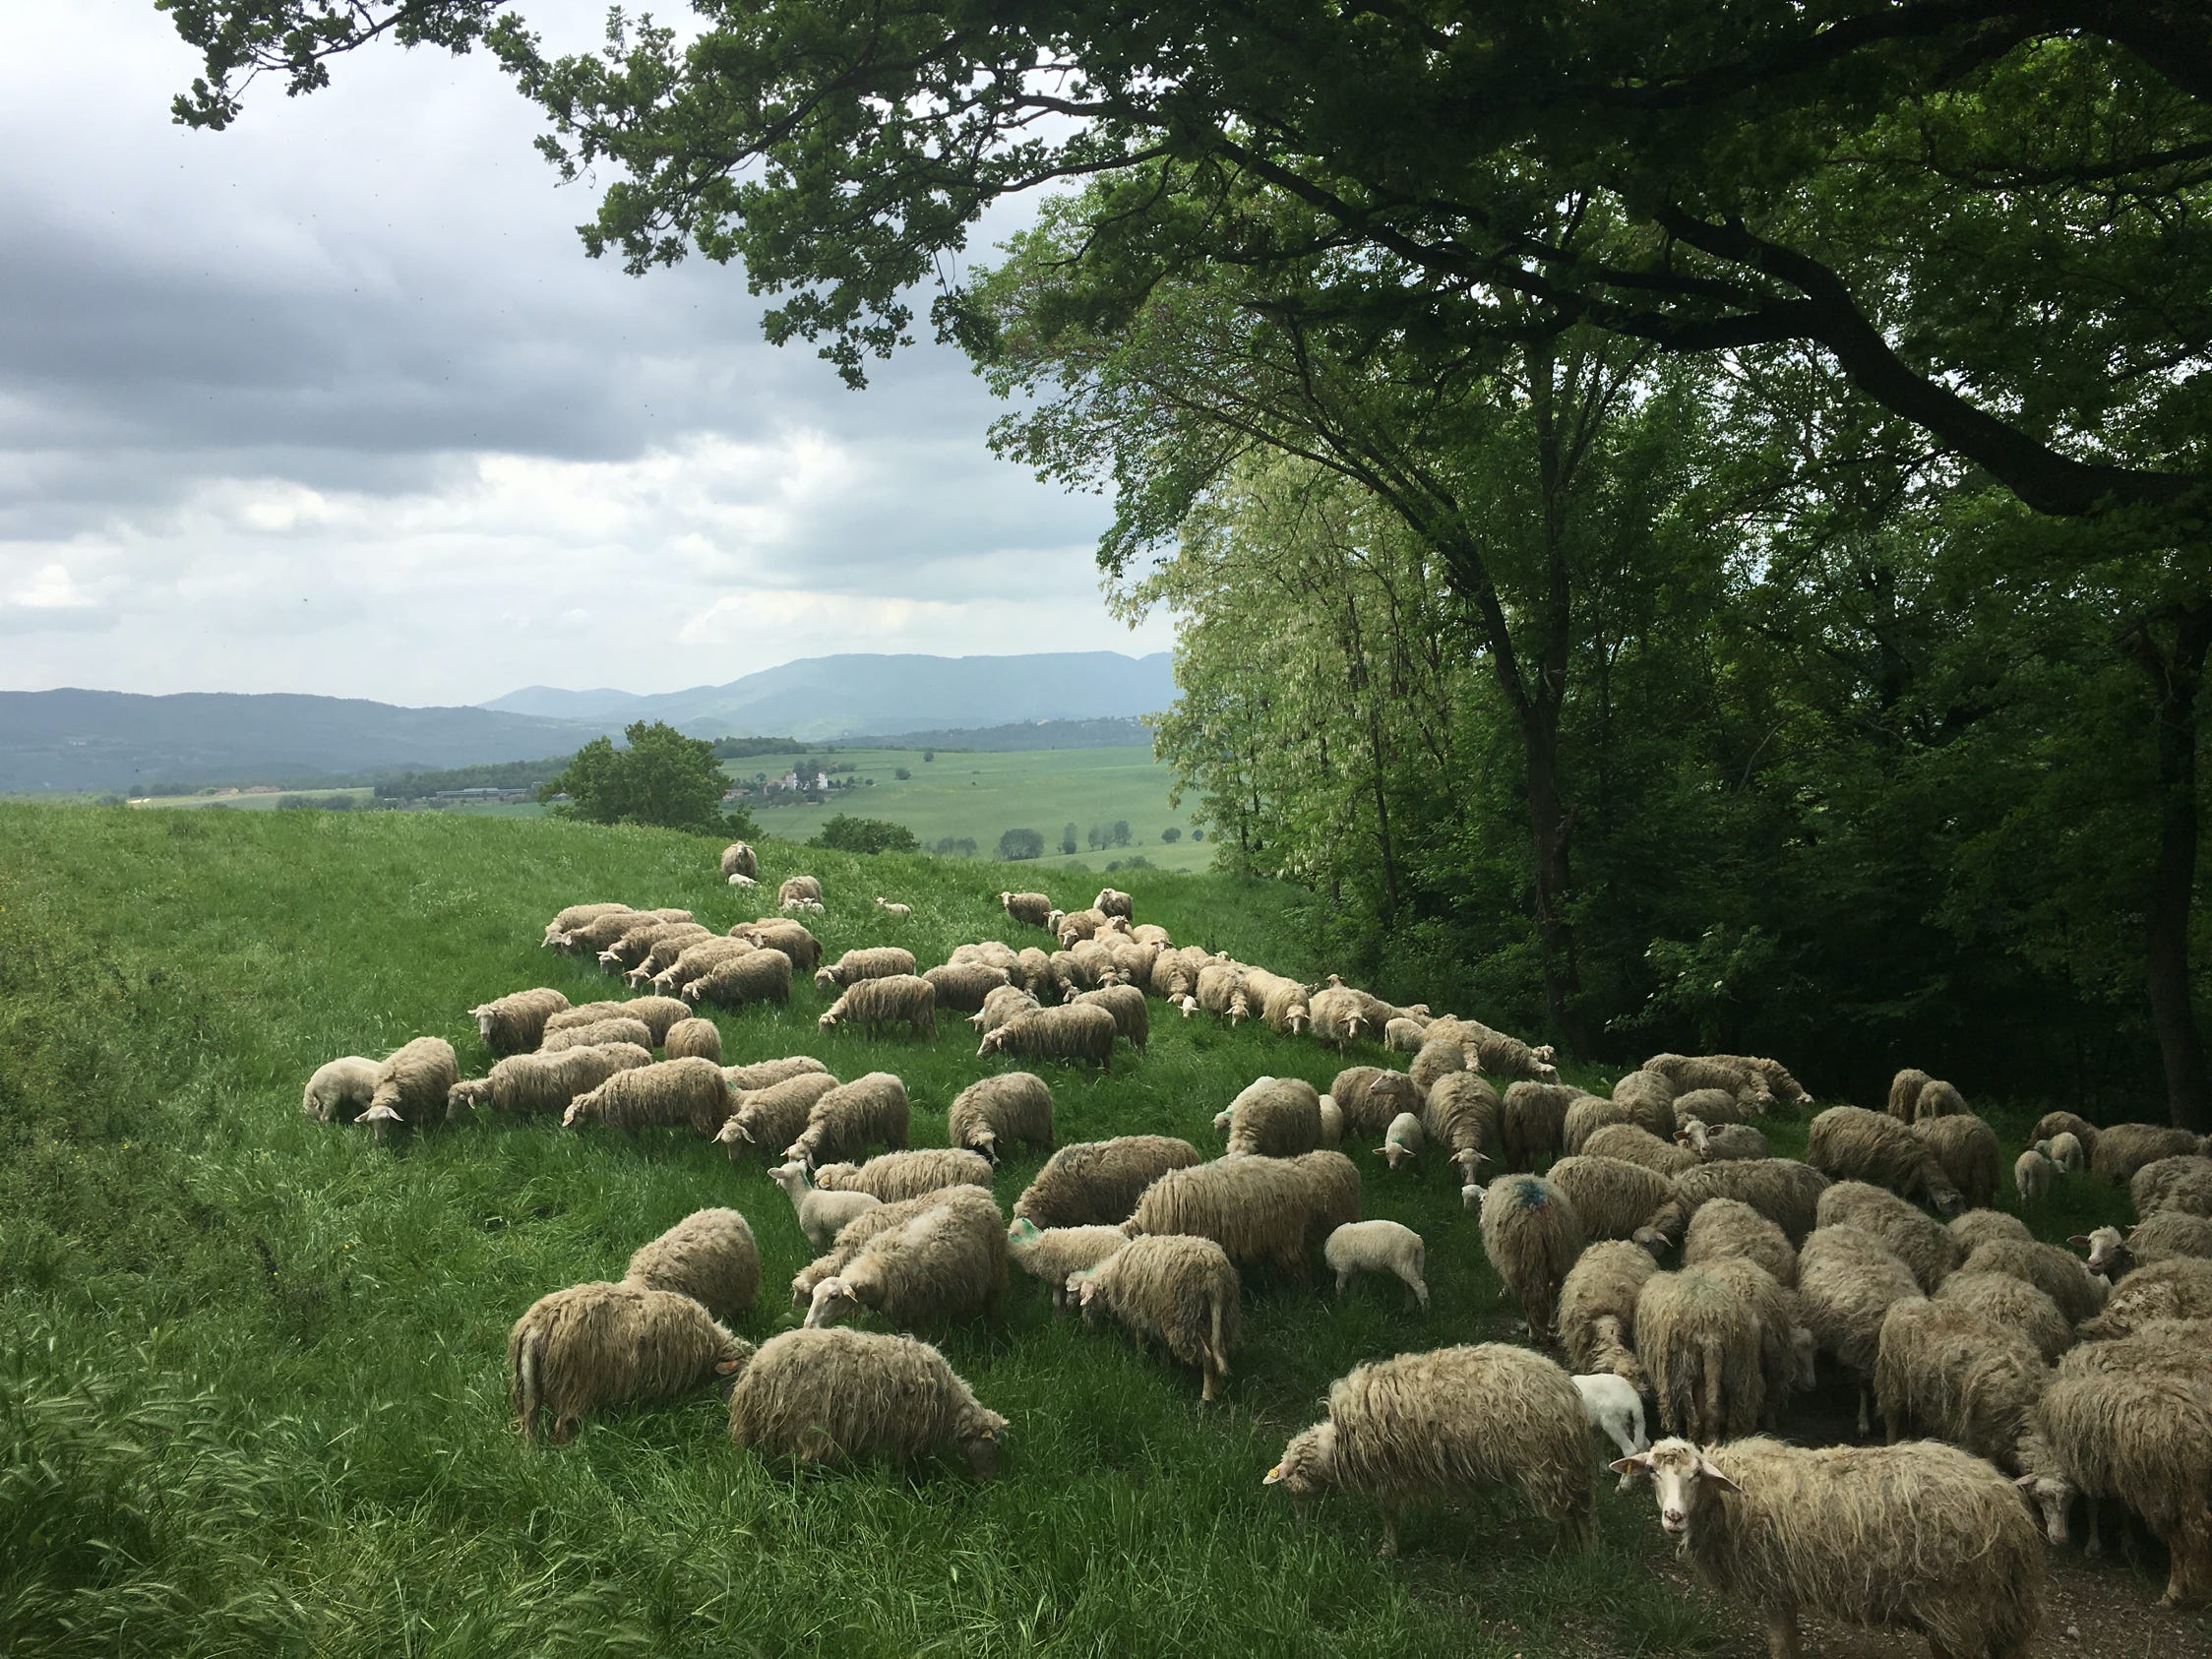 a flock of sheep during the bike tour across the scenic Mugello valley in Tuscany